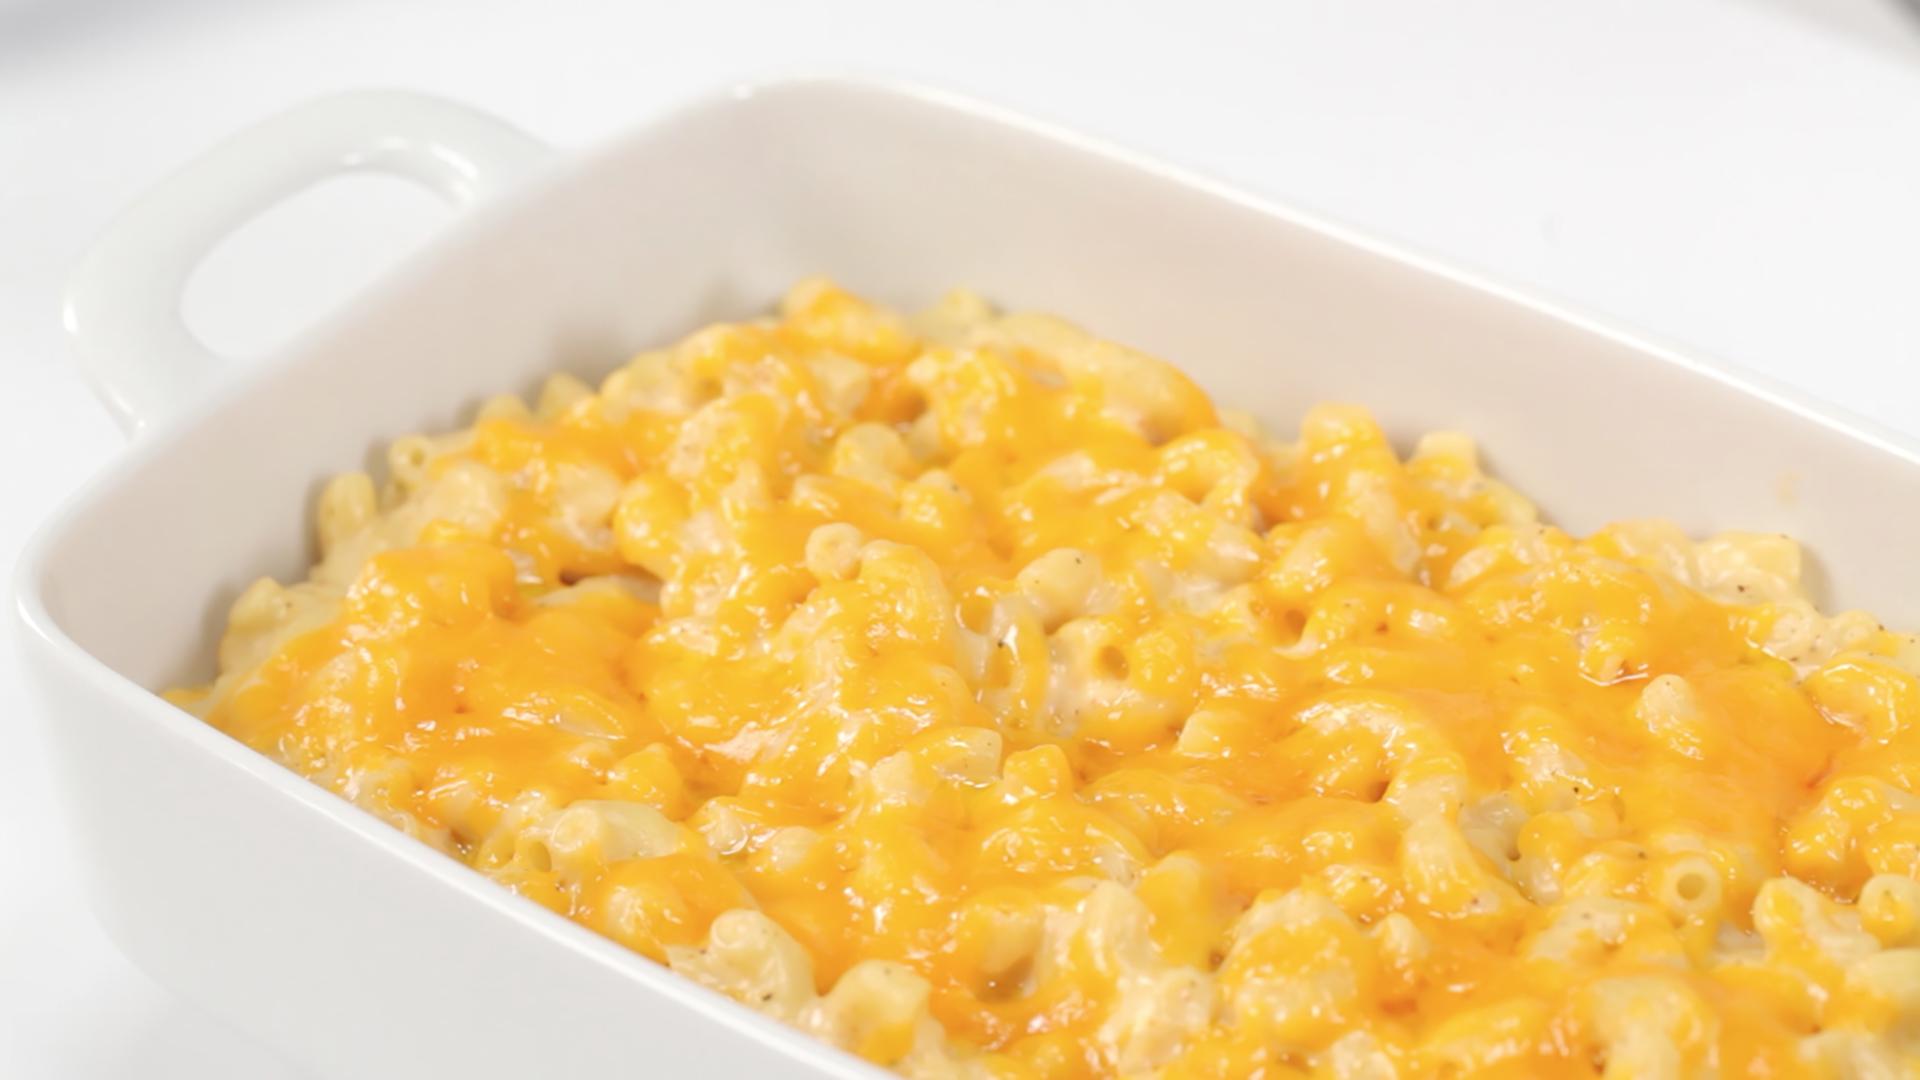 Classic Baked Macaroni and Cheese